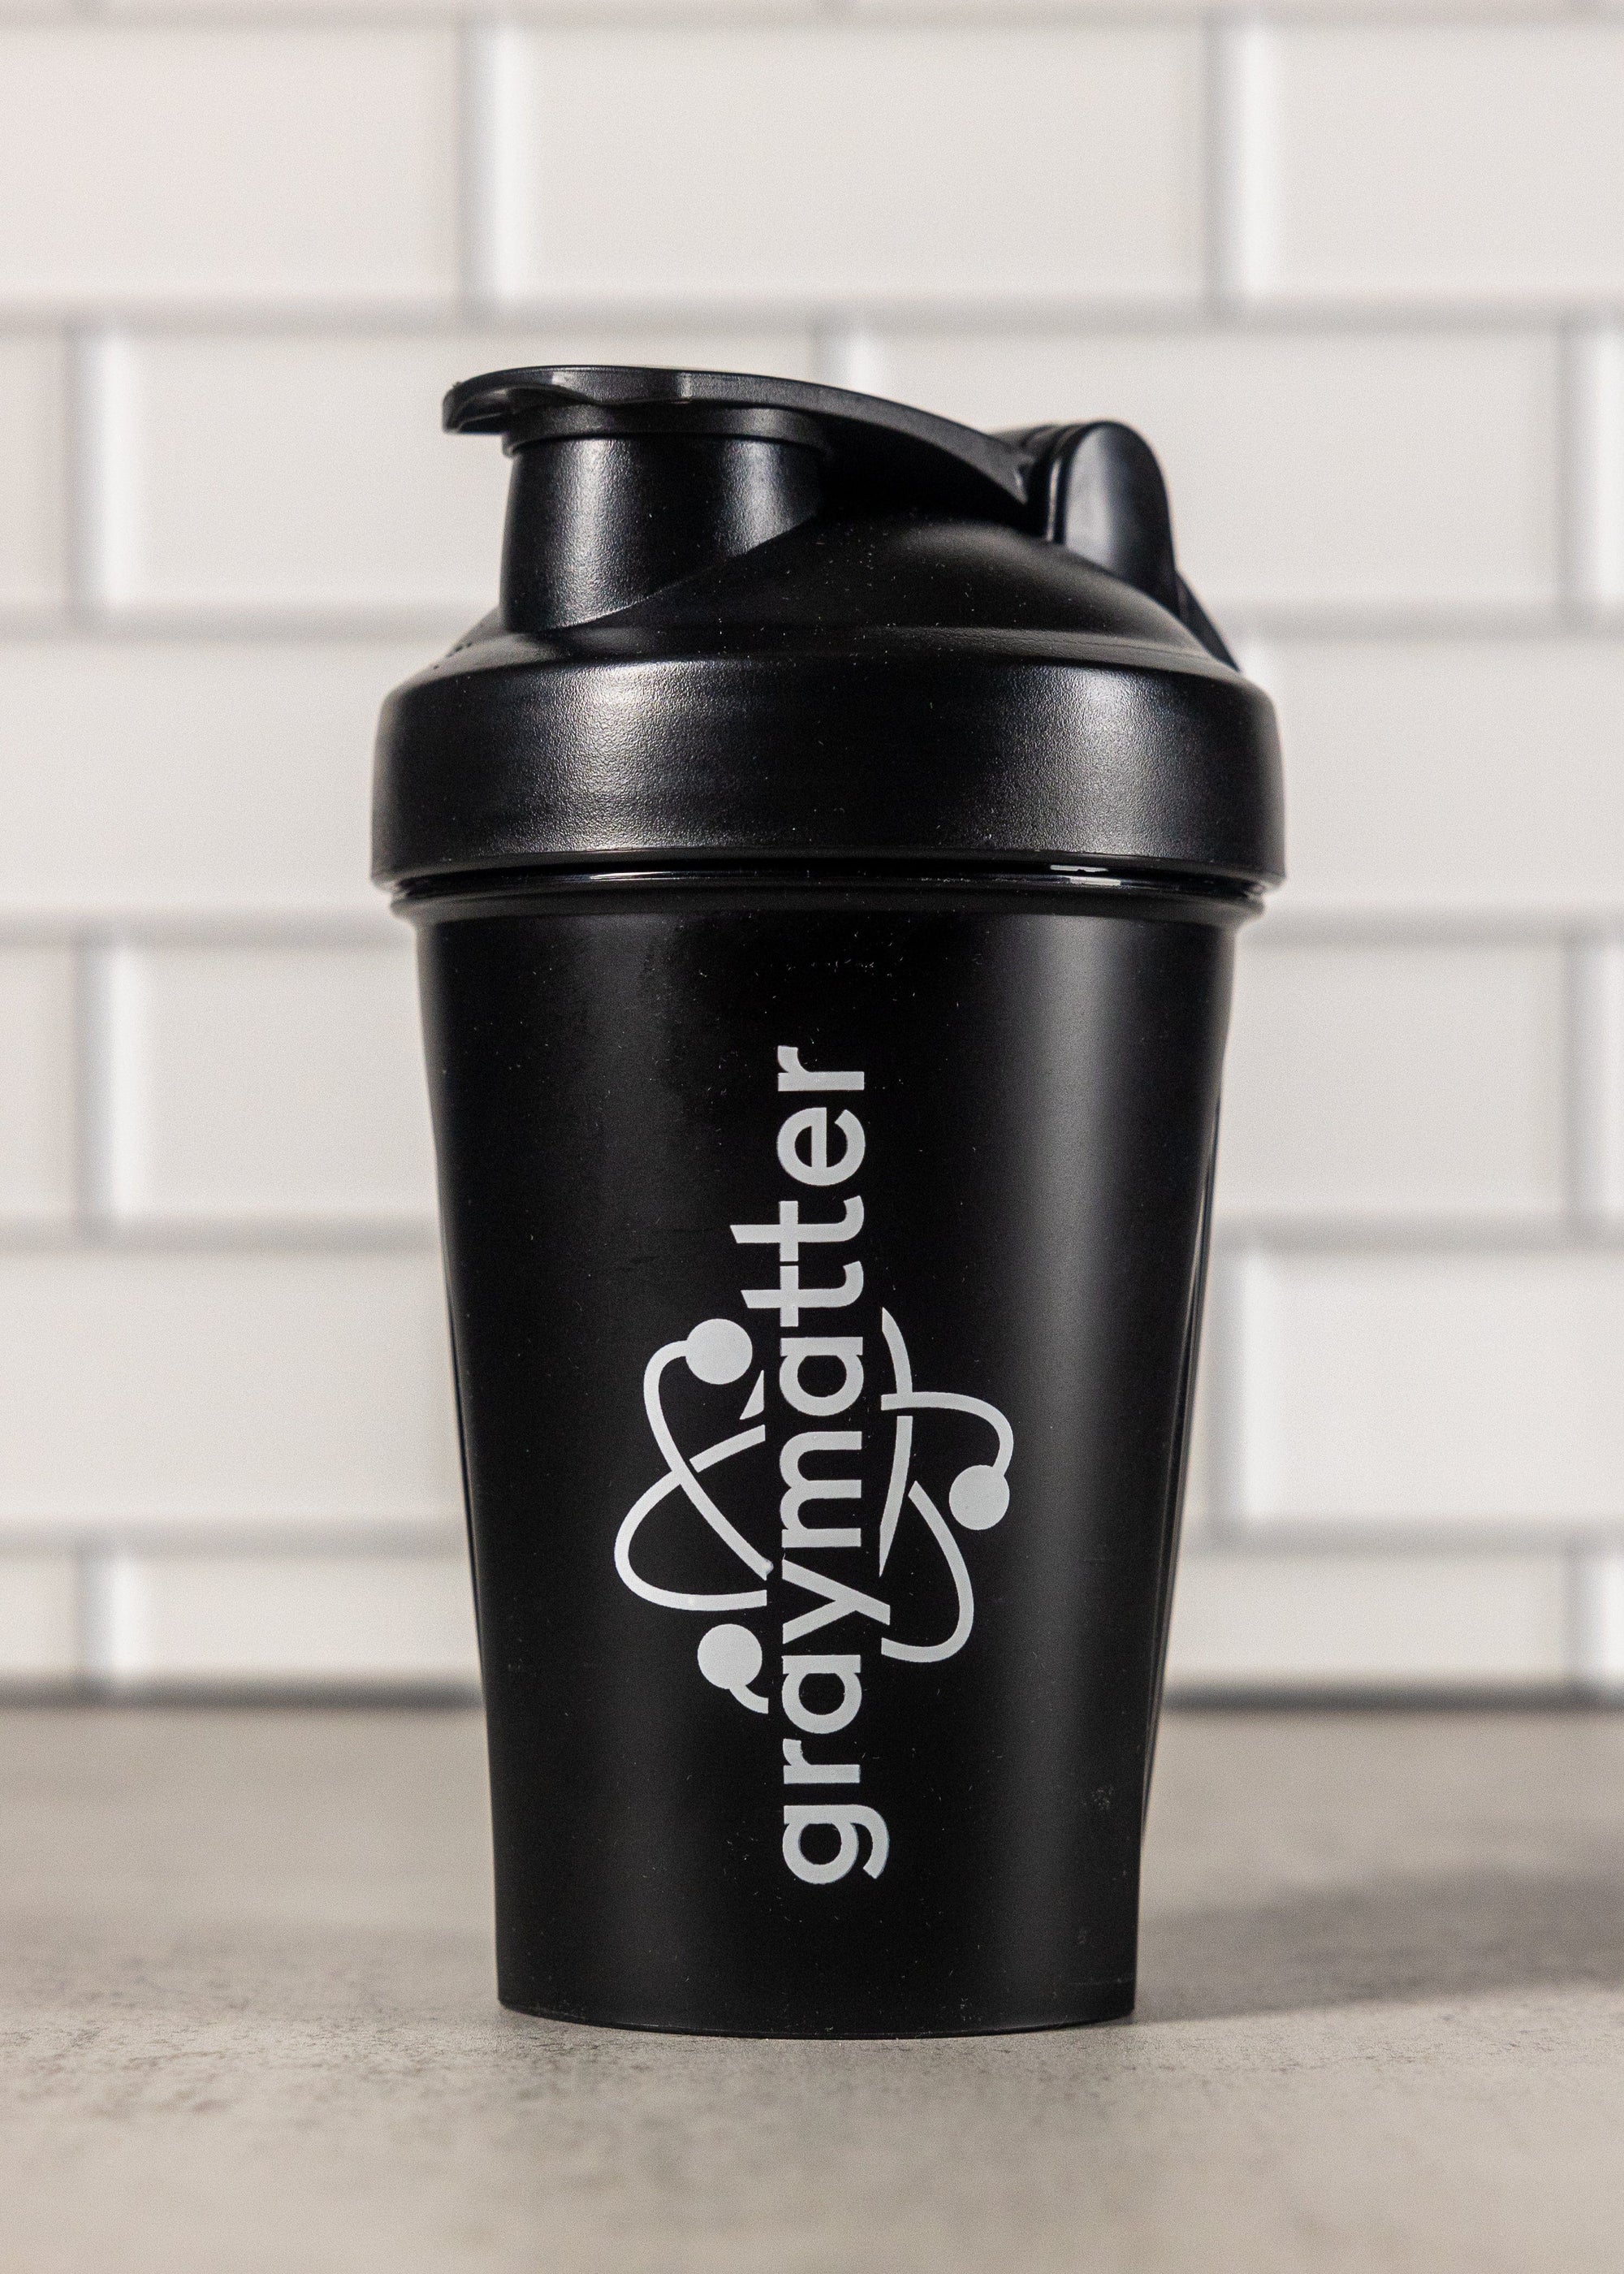 Graymatter Labs Apparel & Accessories shaker bottle Bright Mind Nootropics and adaptogens